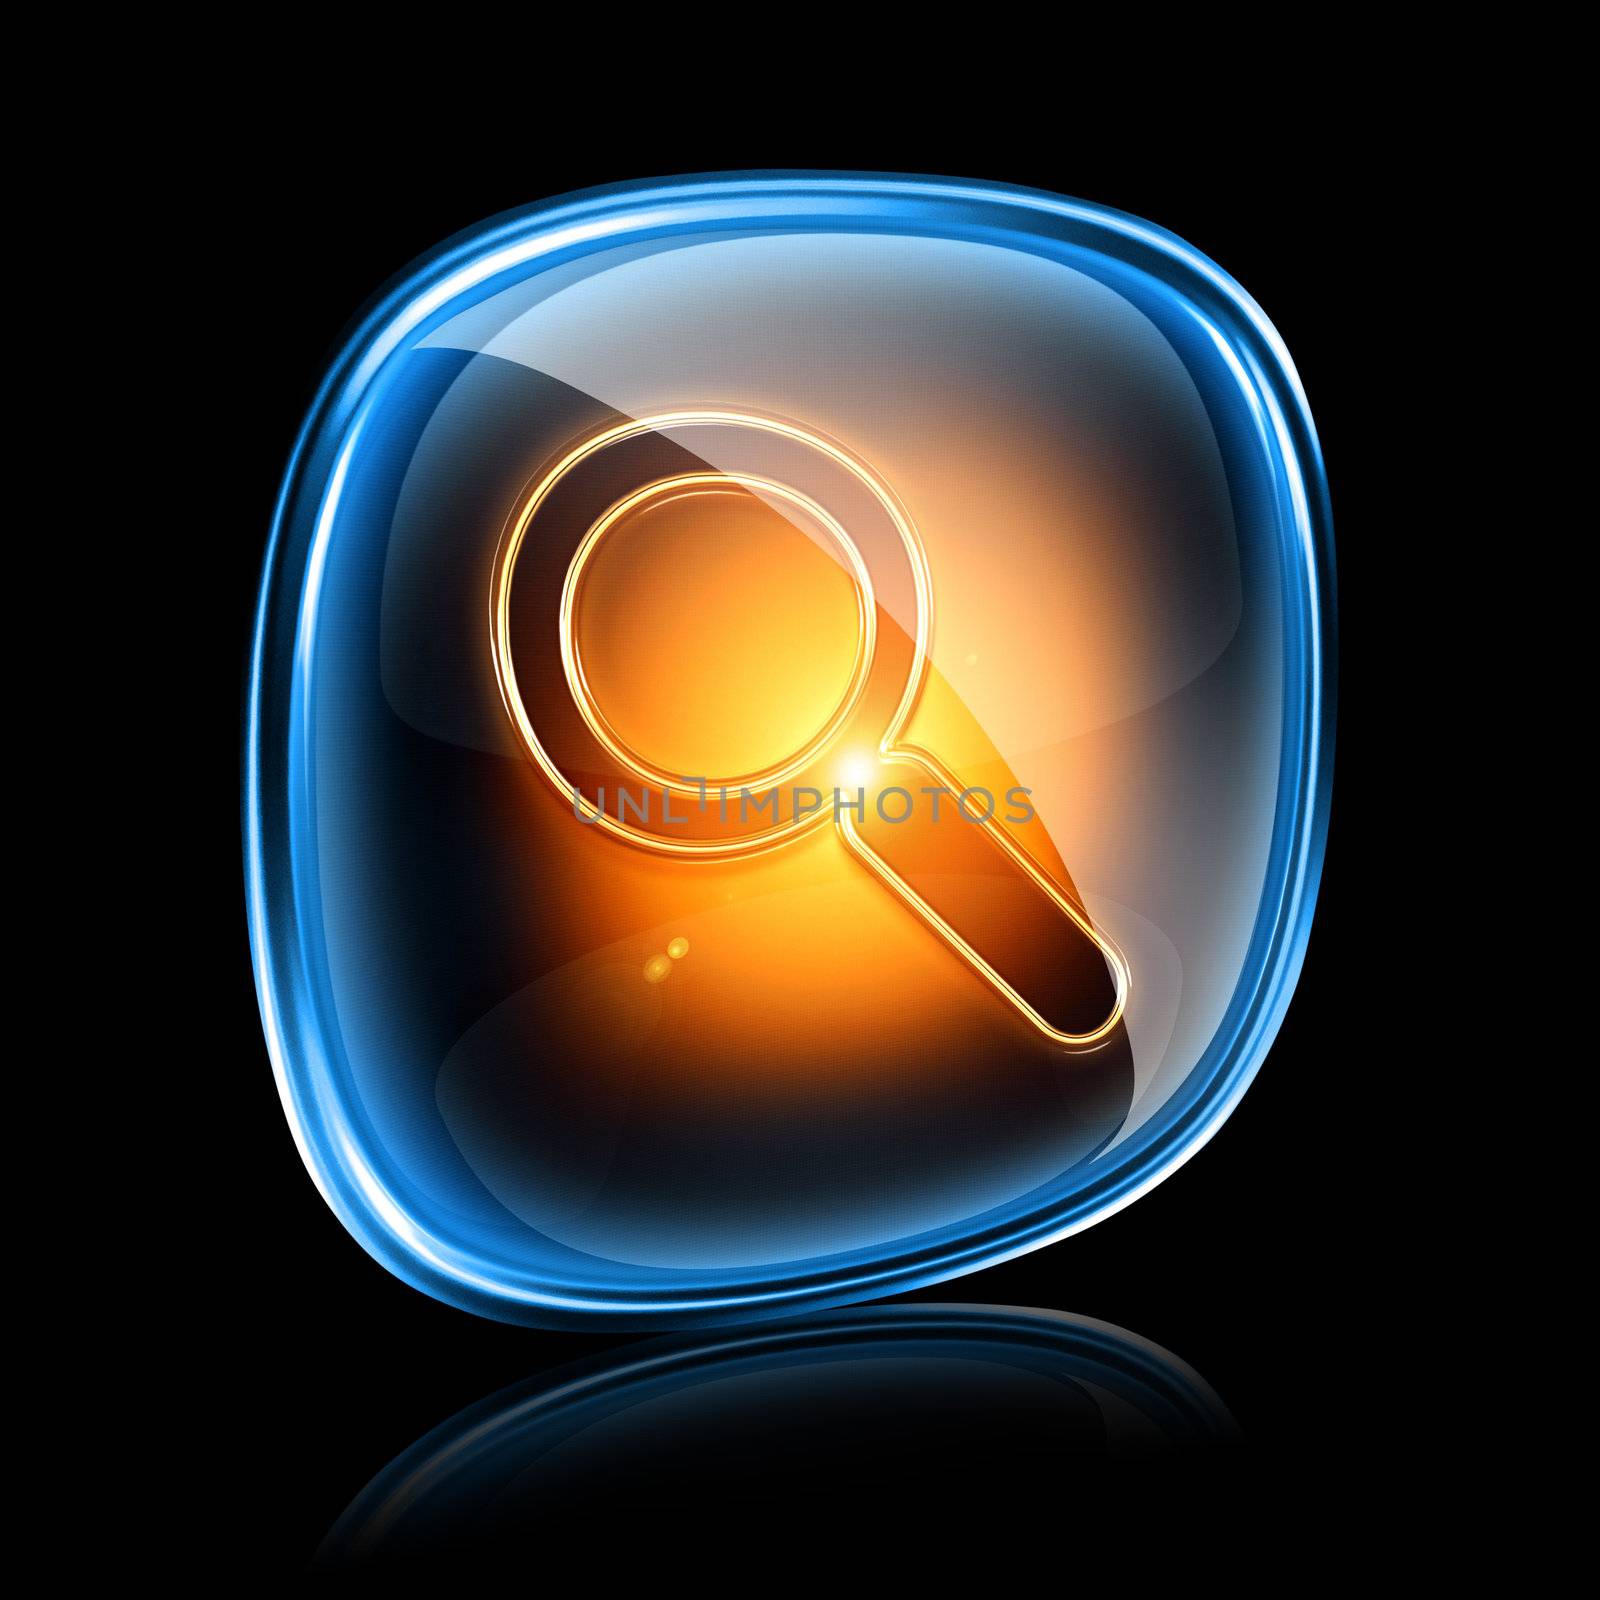 magnifier icon neon, isolated on black background